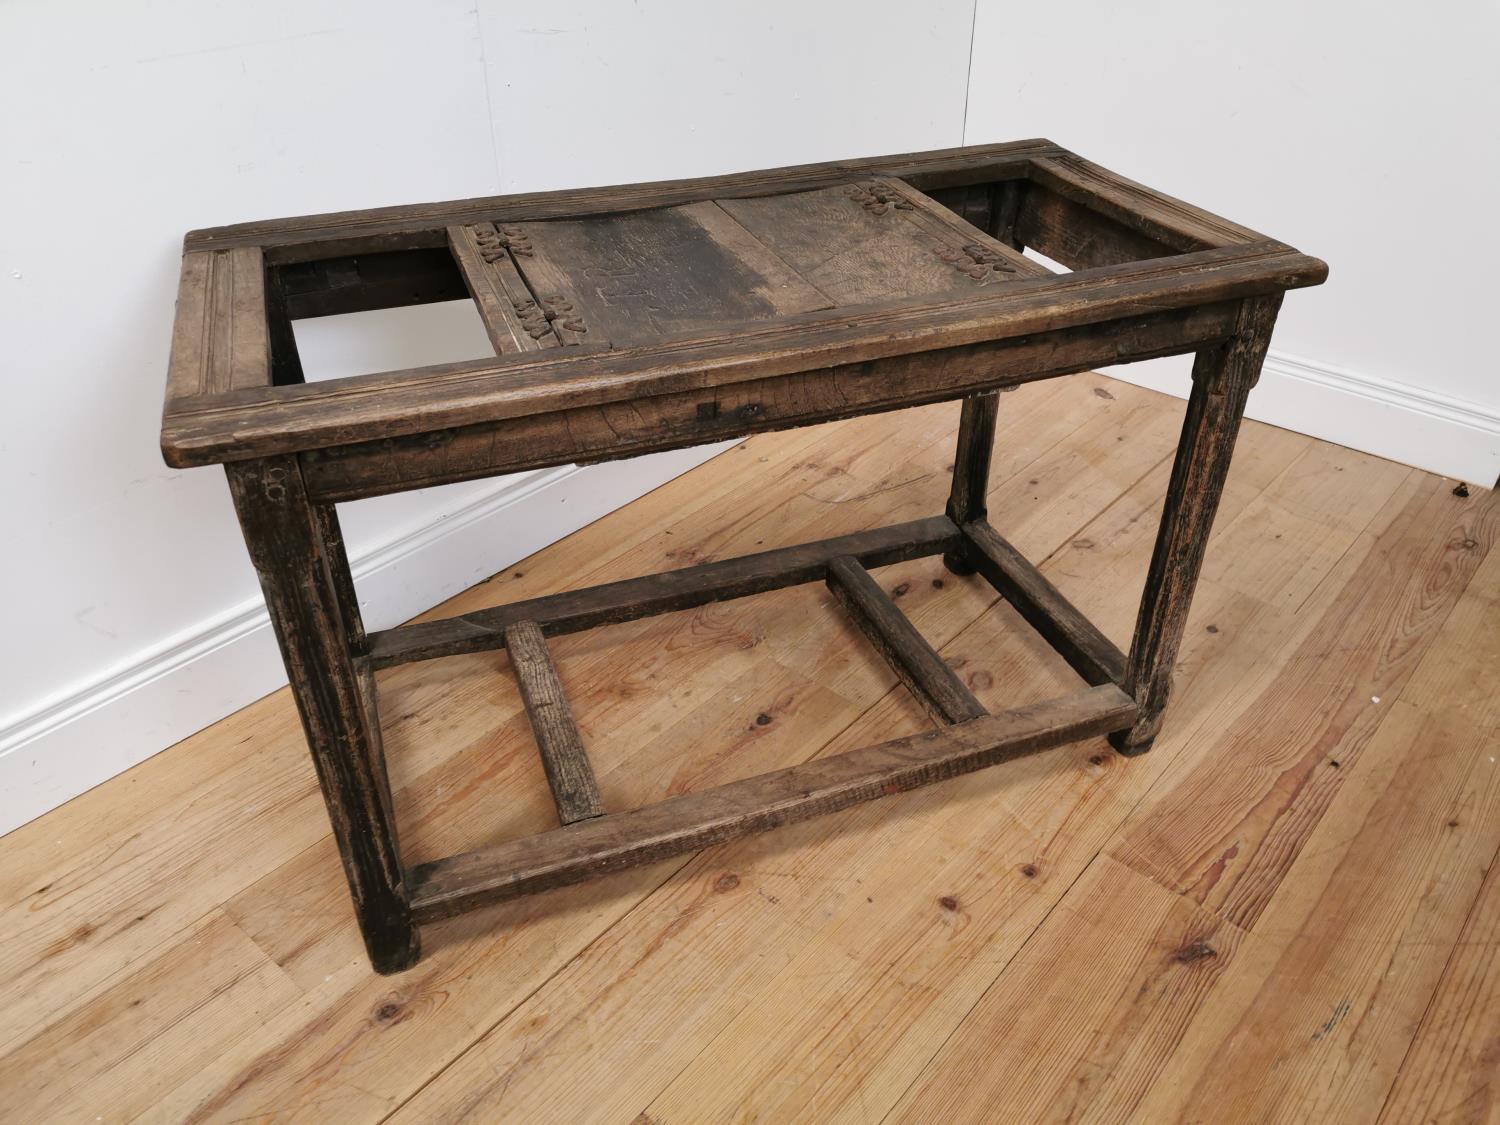 Rare 17th. C. oak bible table the two doors in the centre panel with metal fittings and inscribed T+